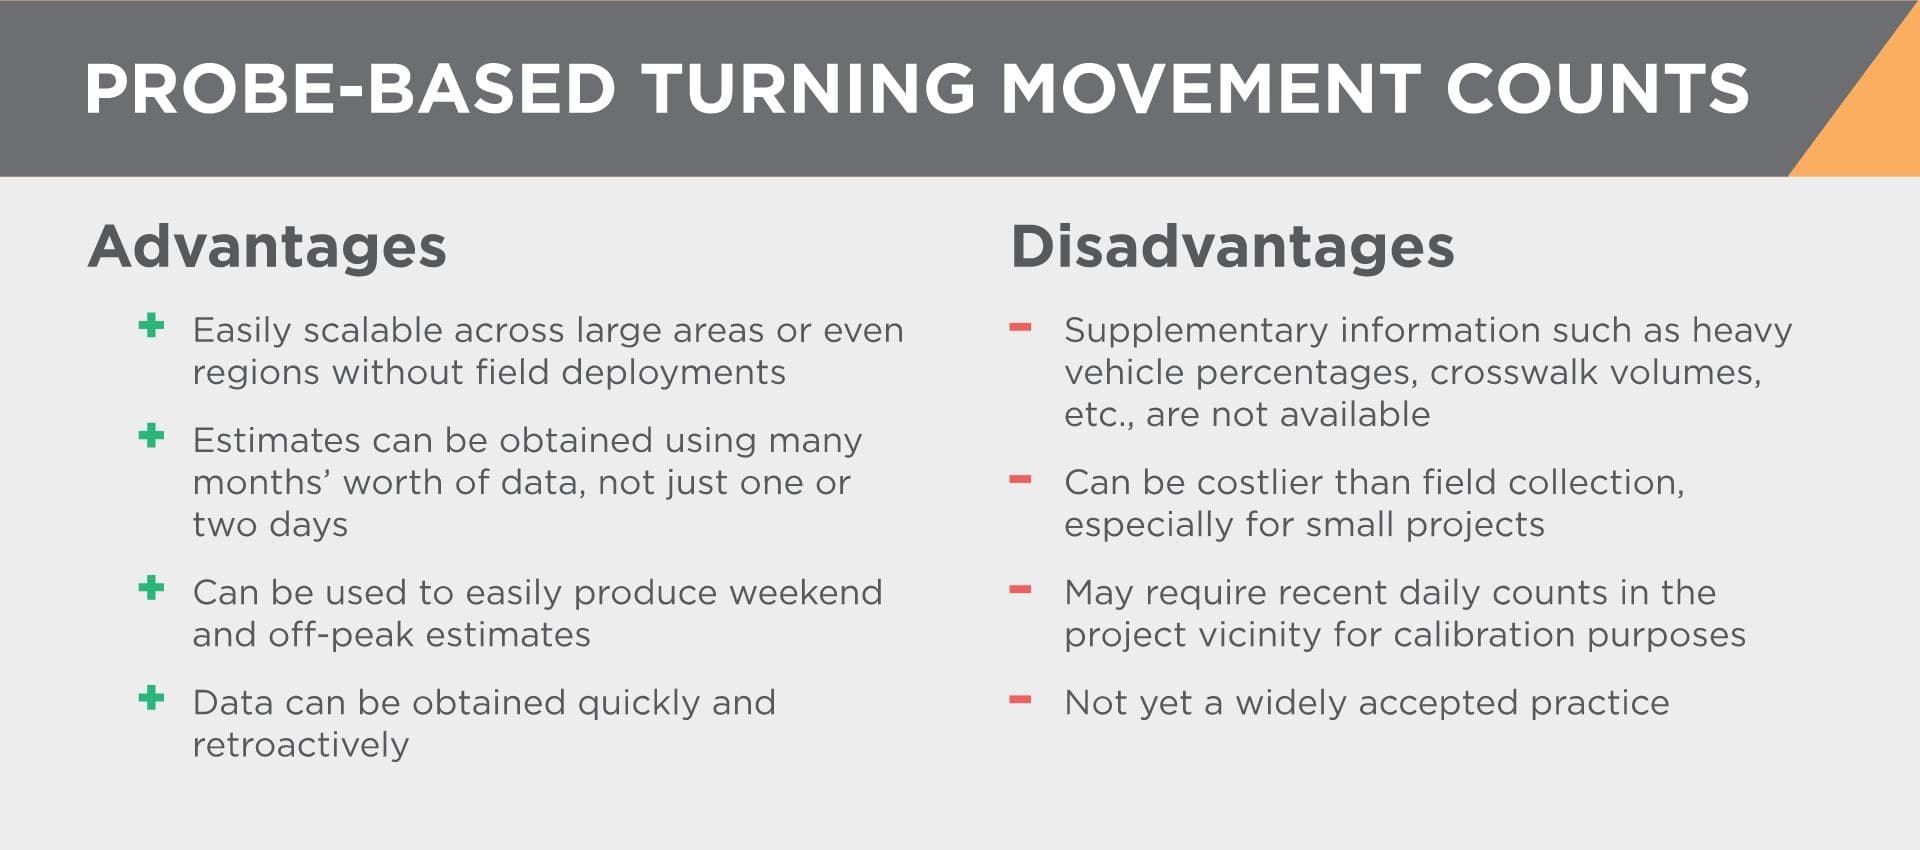 Advantages and Disadvantages of Probe Data for Turning Movement Counts